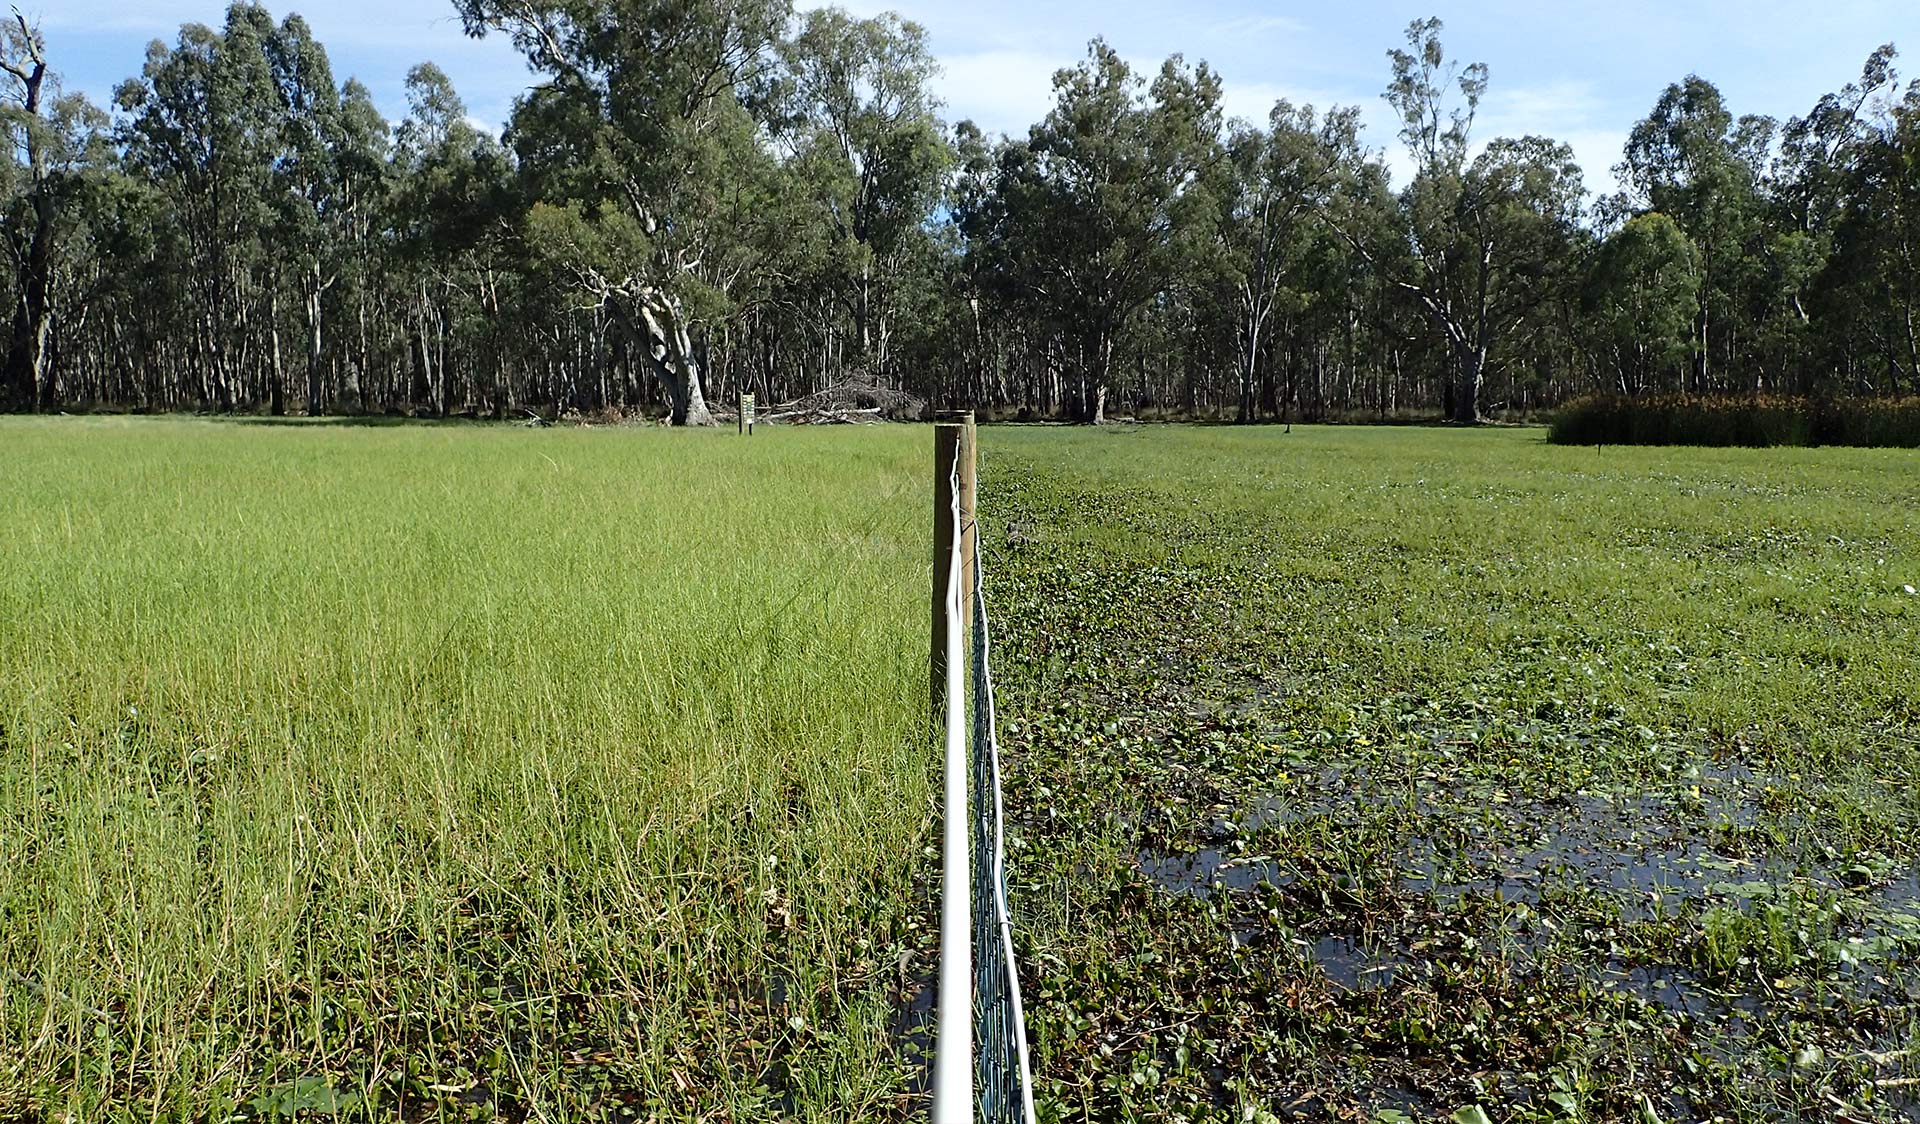 Exclusion fence at Little Rushy Swamp in Barmah National Park, showing intact vegetation inside fence and feral animal damage outside fence